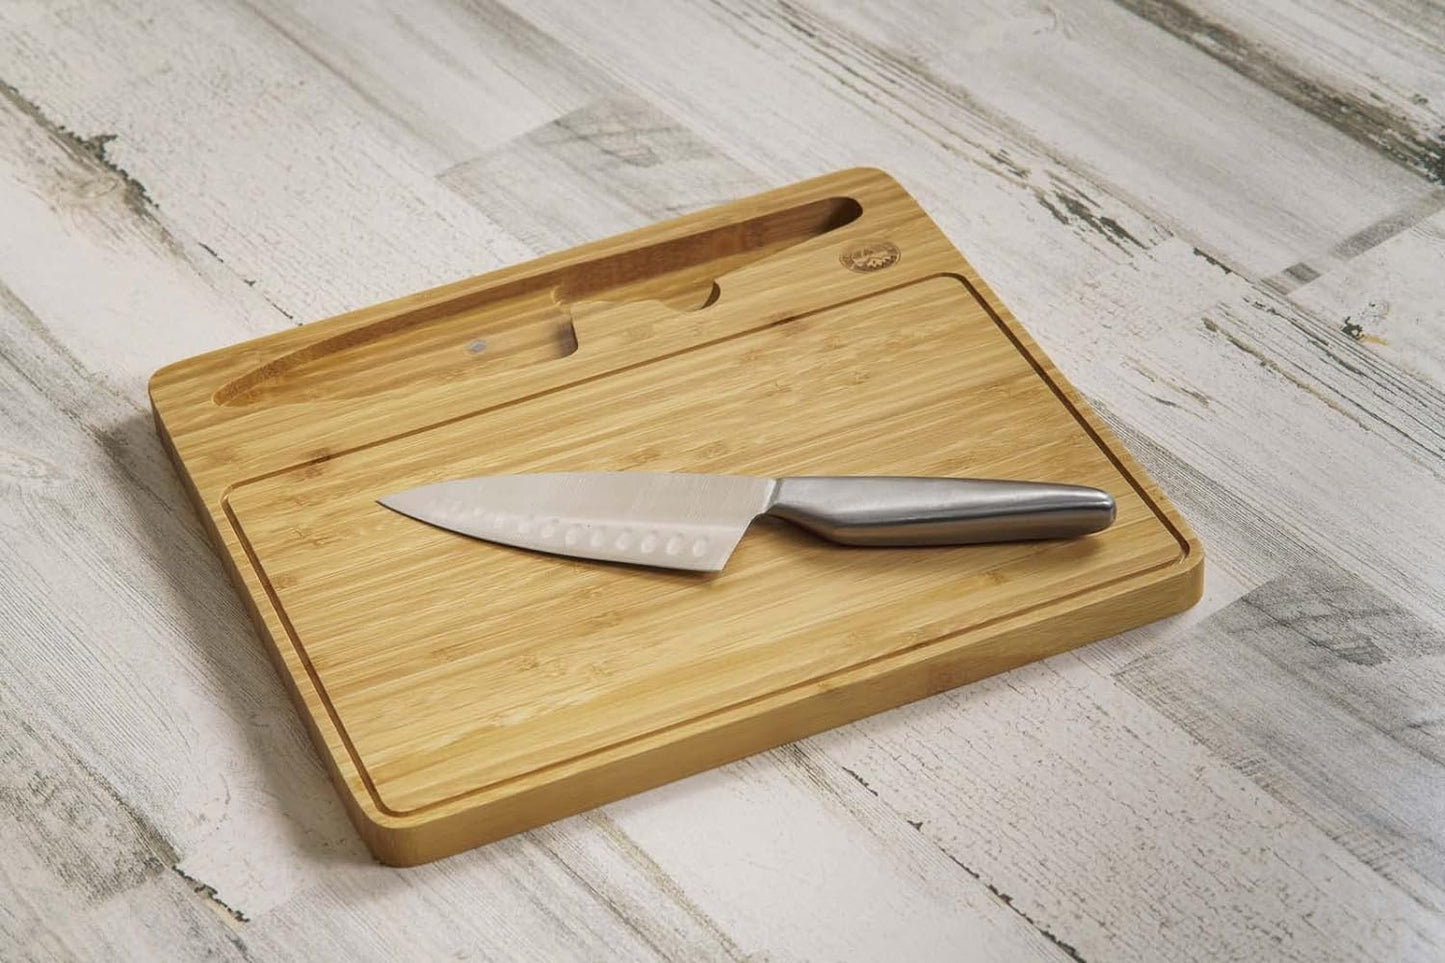 Switchback Travel Cutting Board | 13" x 12" Bamboo Cutting Board | Included Chef's Knife, Silicone Travel Cover | Perfect For RV'ing